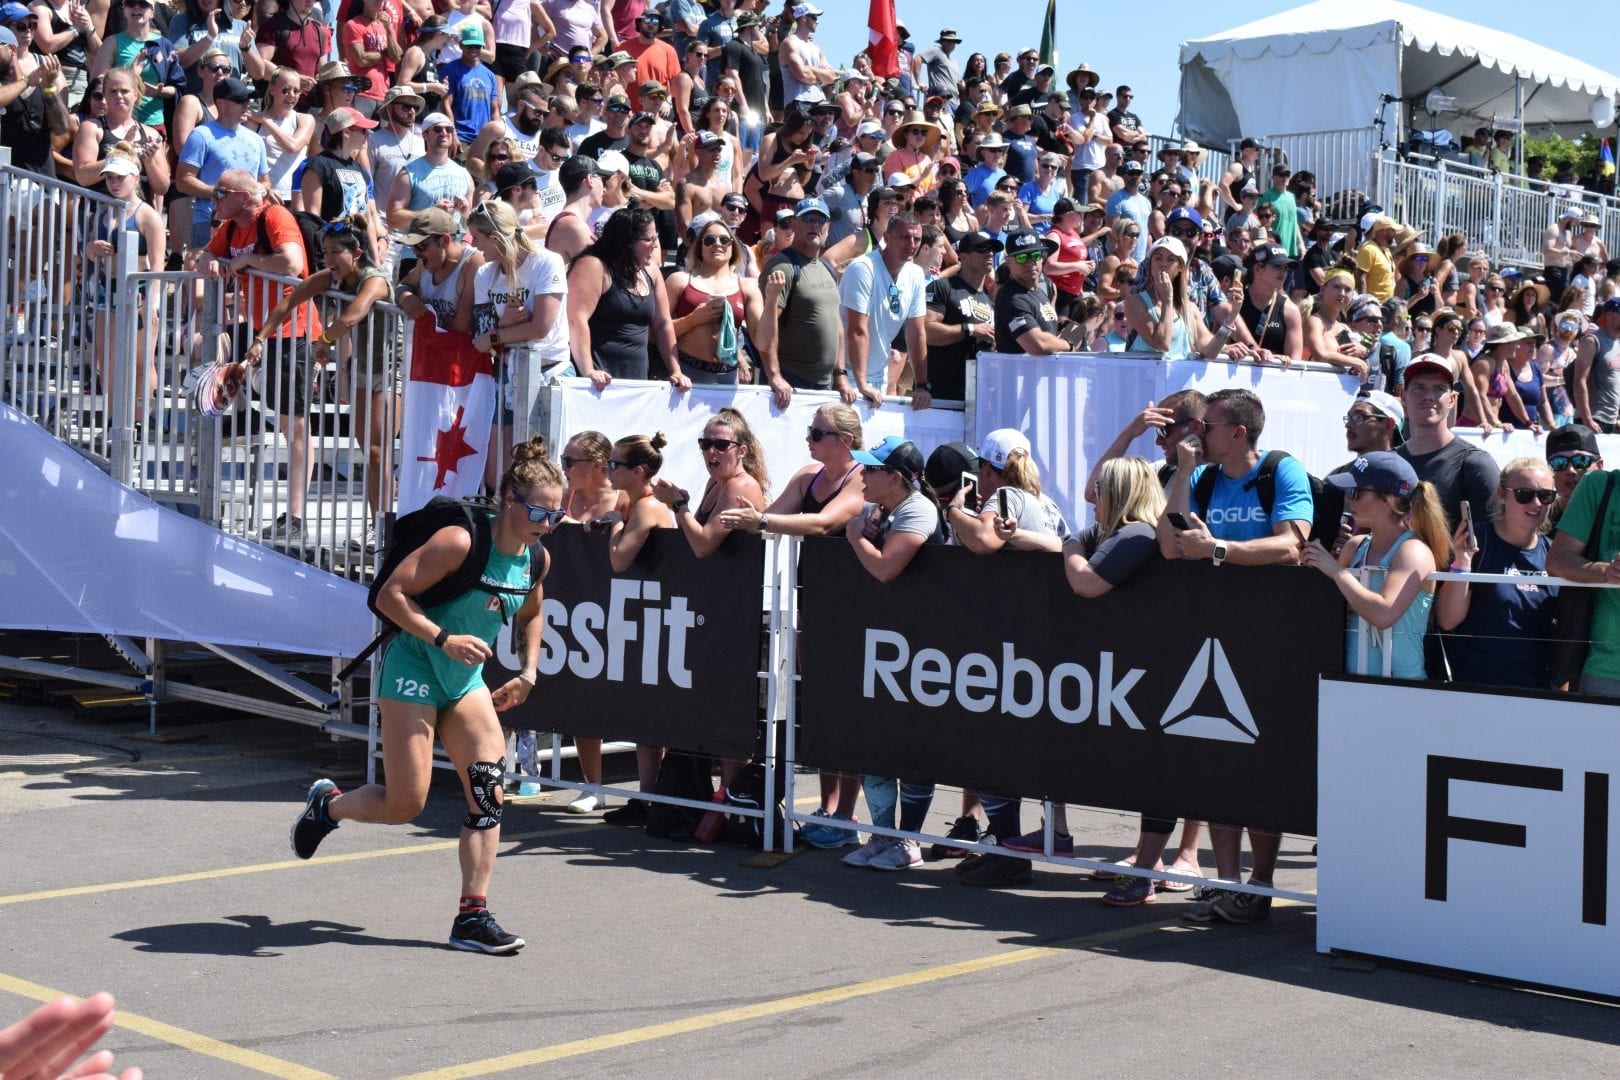 Carol-Ann Reason-Thibault completes the Ruck Run event of the 2019 CrossFit Games.